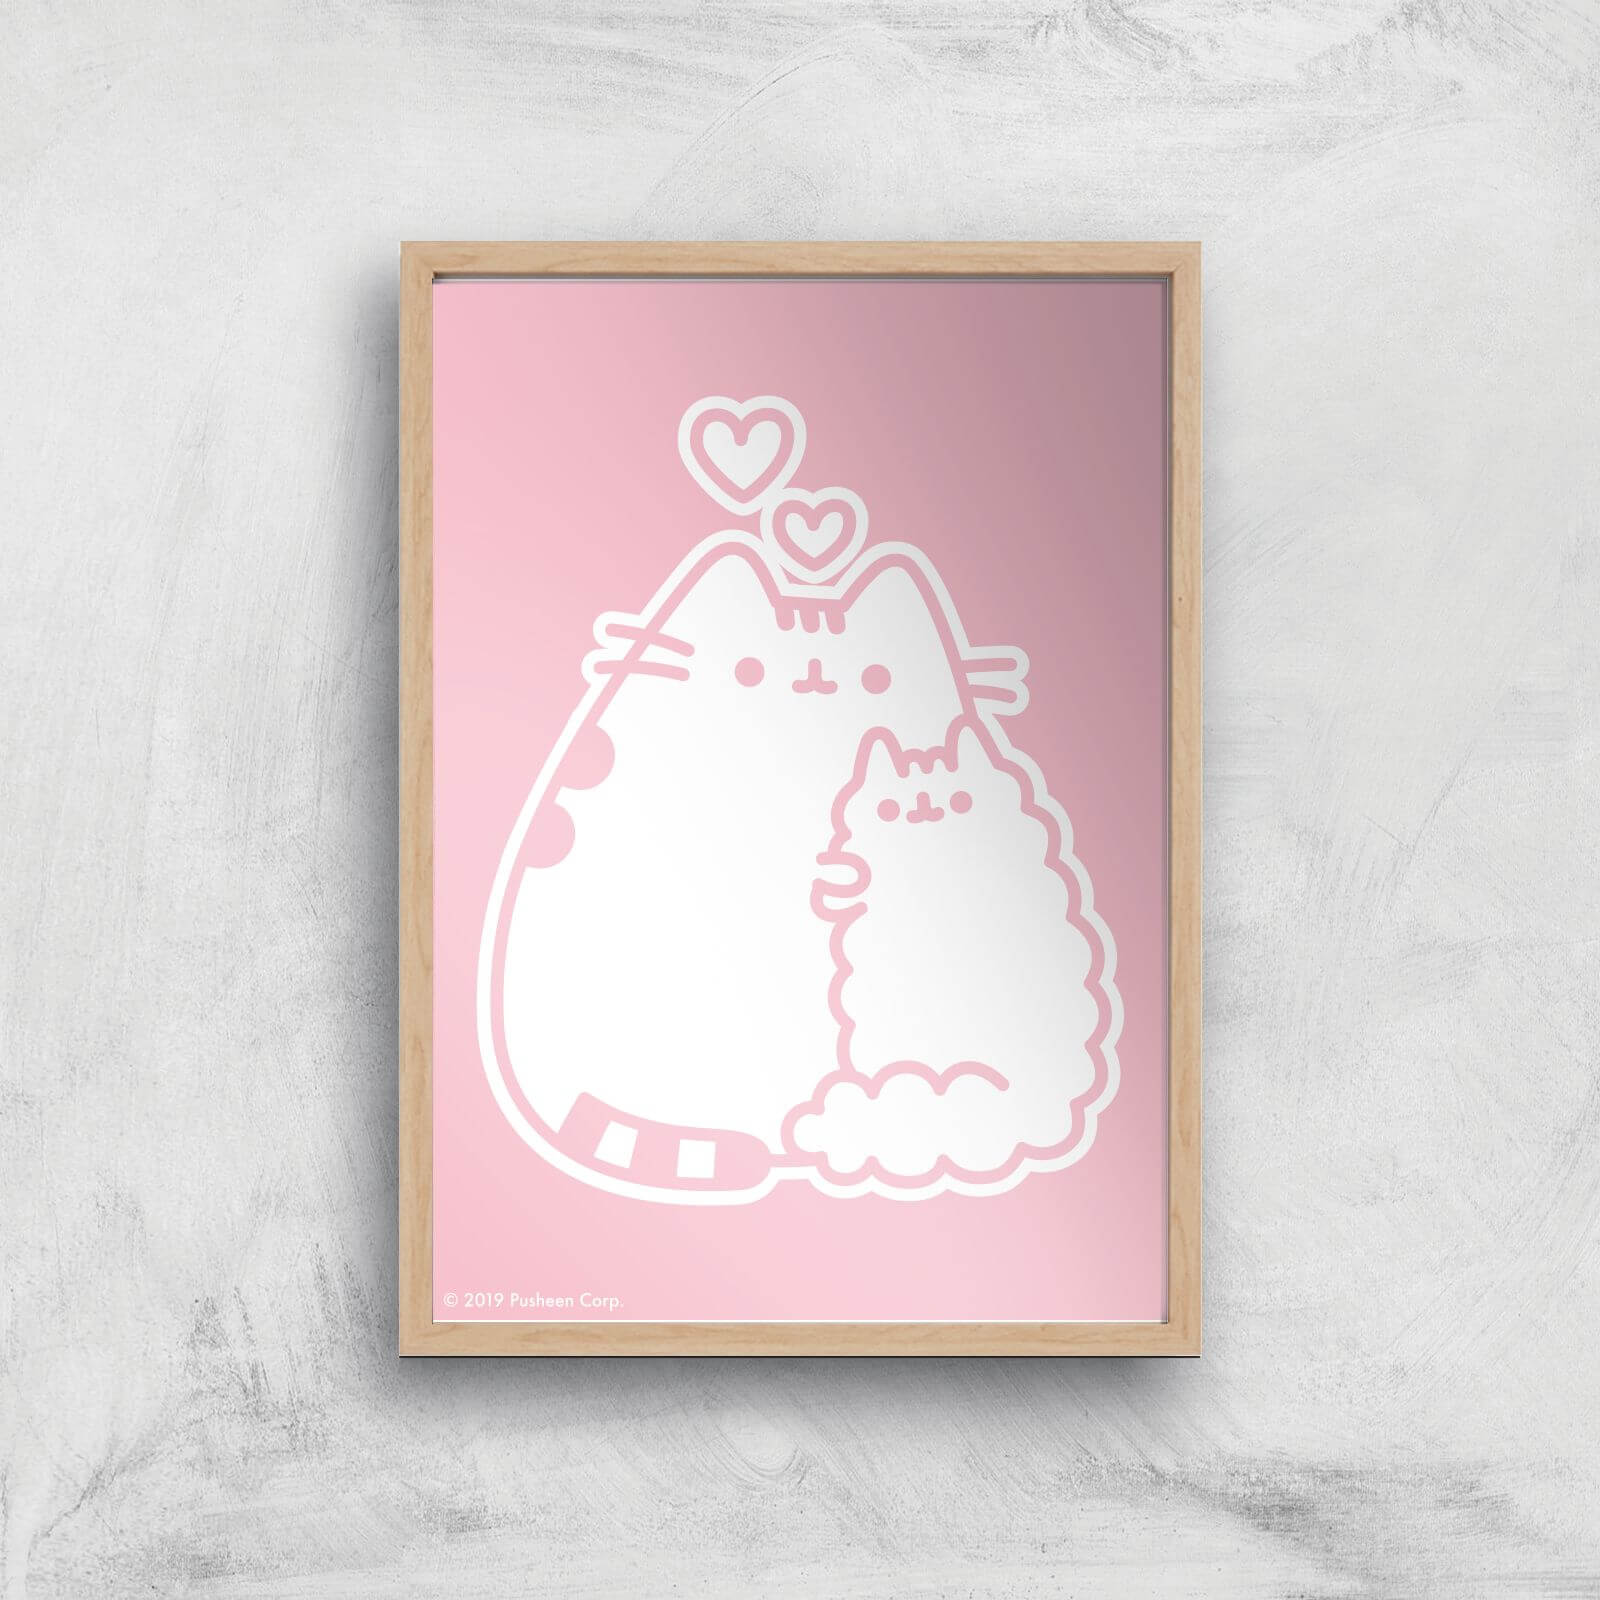 Pusheen Stormy I Love You Giclee Art Print - A3 - Wooden Frame